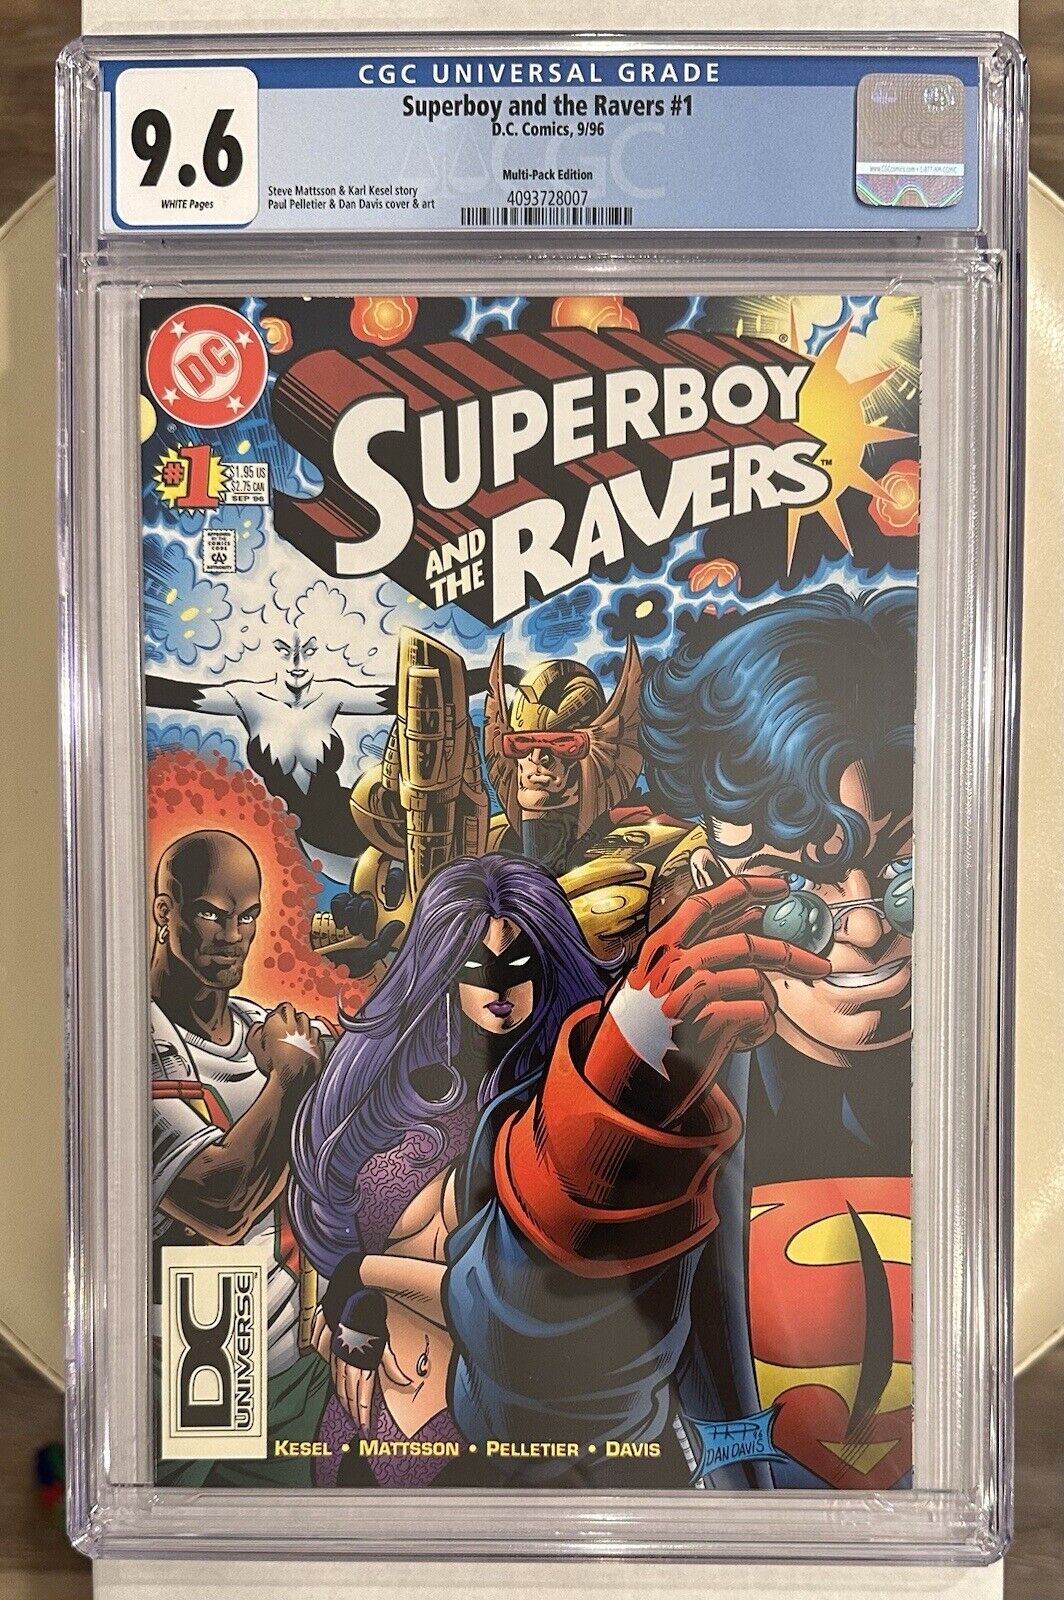 Superboy and the Ravers #1 DCU Variant CGC 9.6 1 of 1 on Census Only Pop